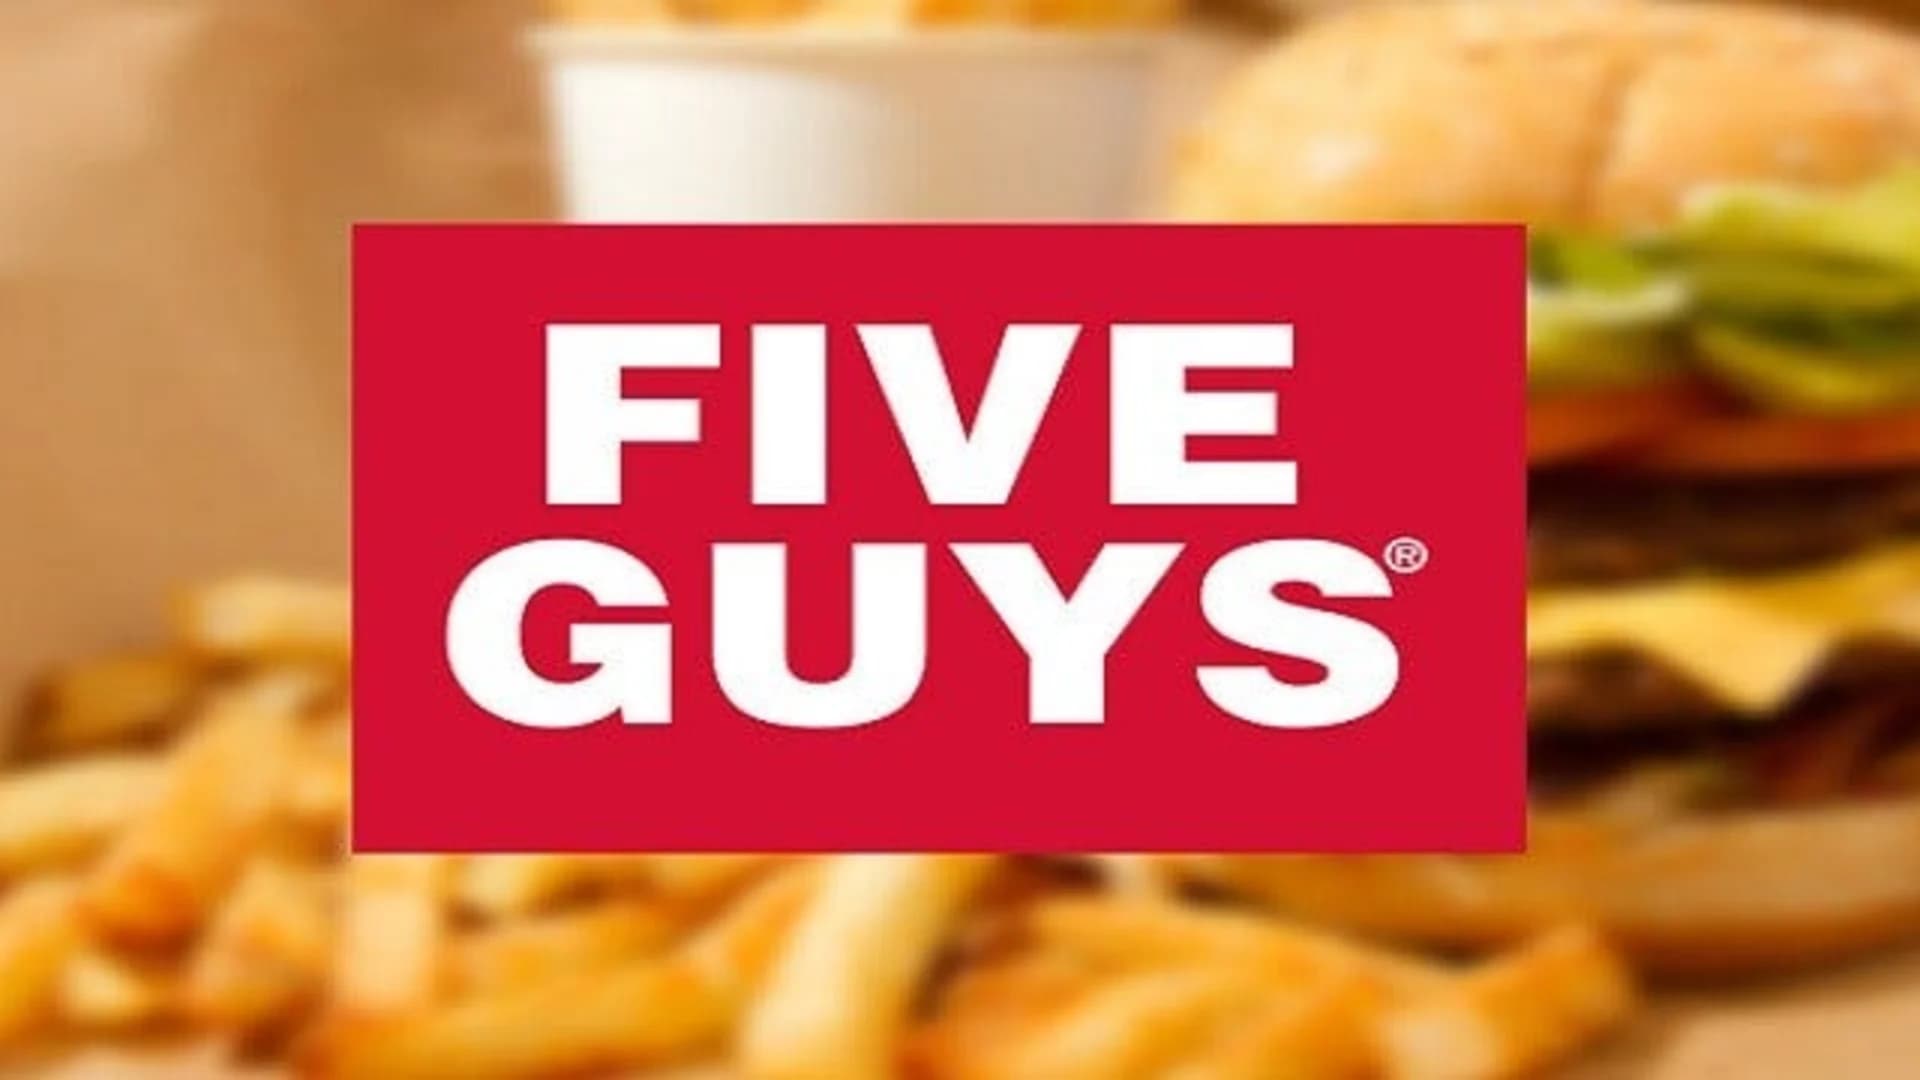 Five Guys dethrones In-N-Out as best burger chain in new study